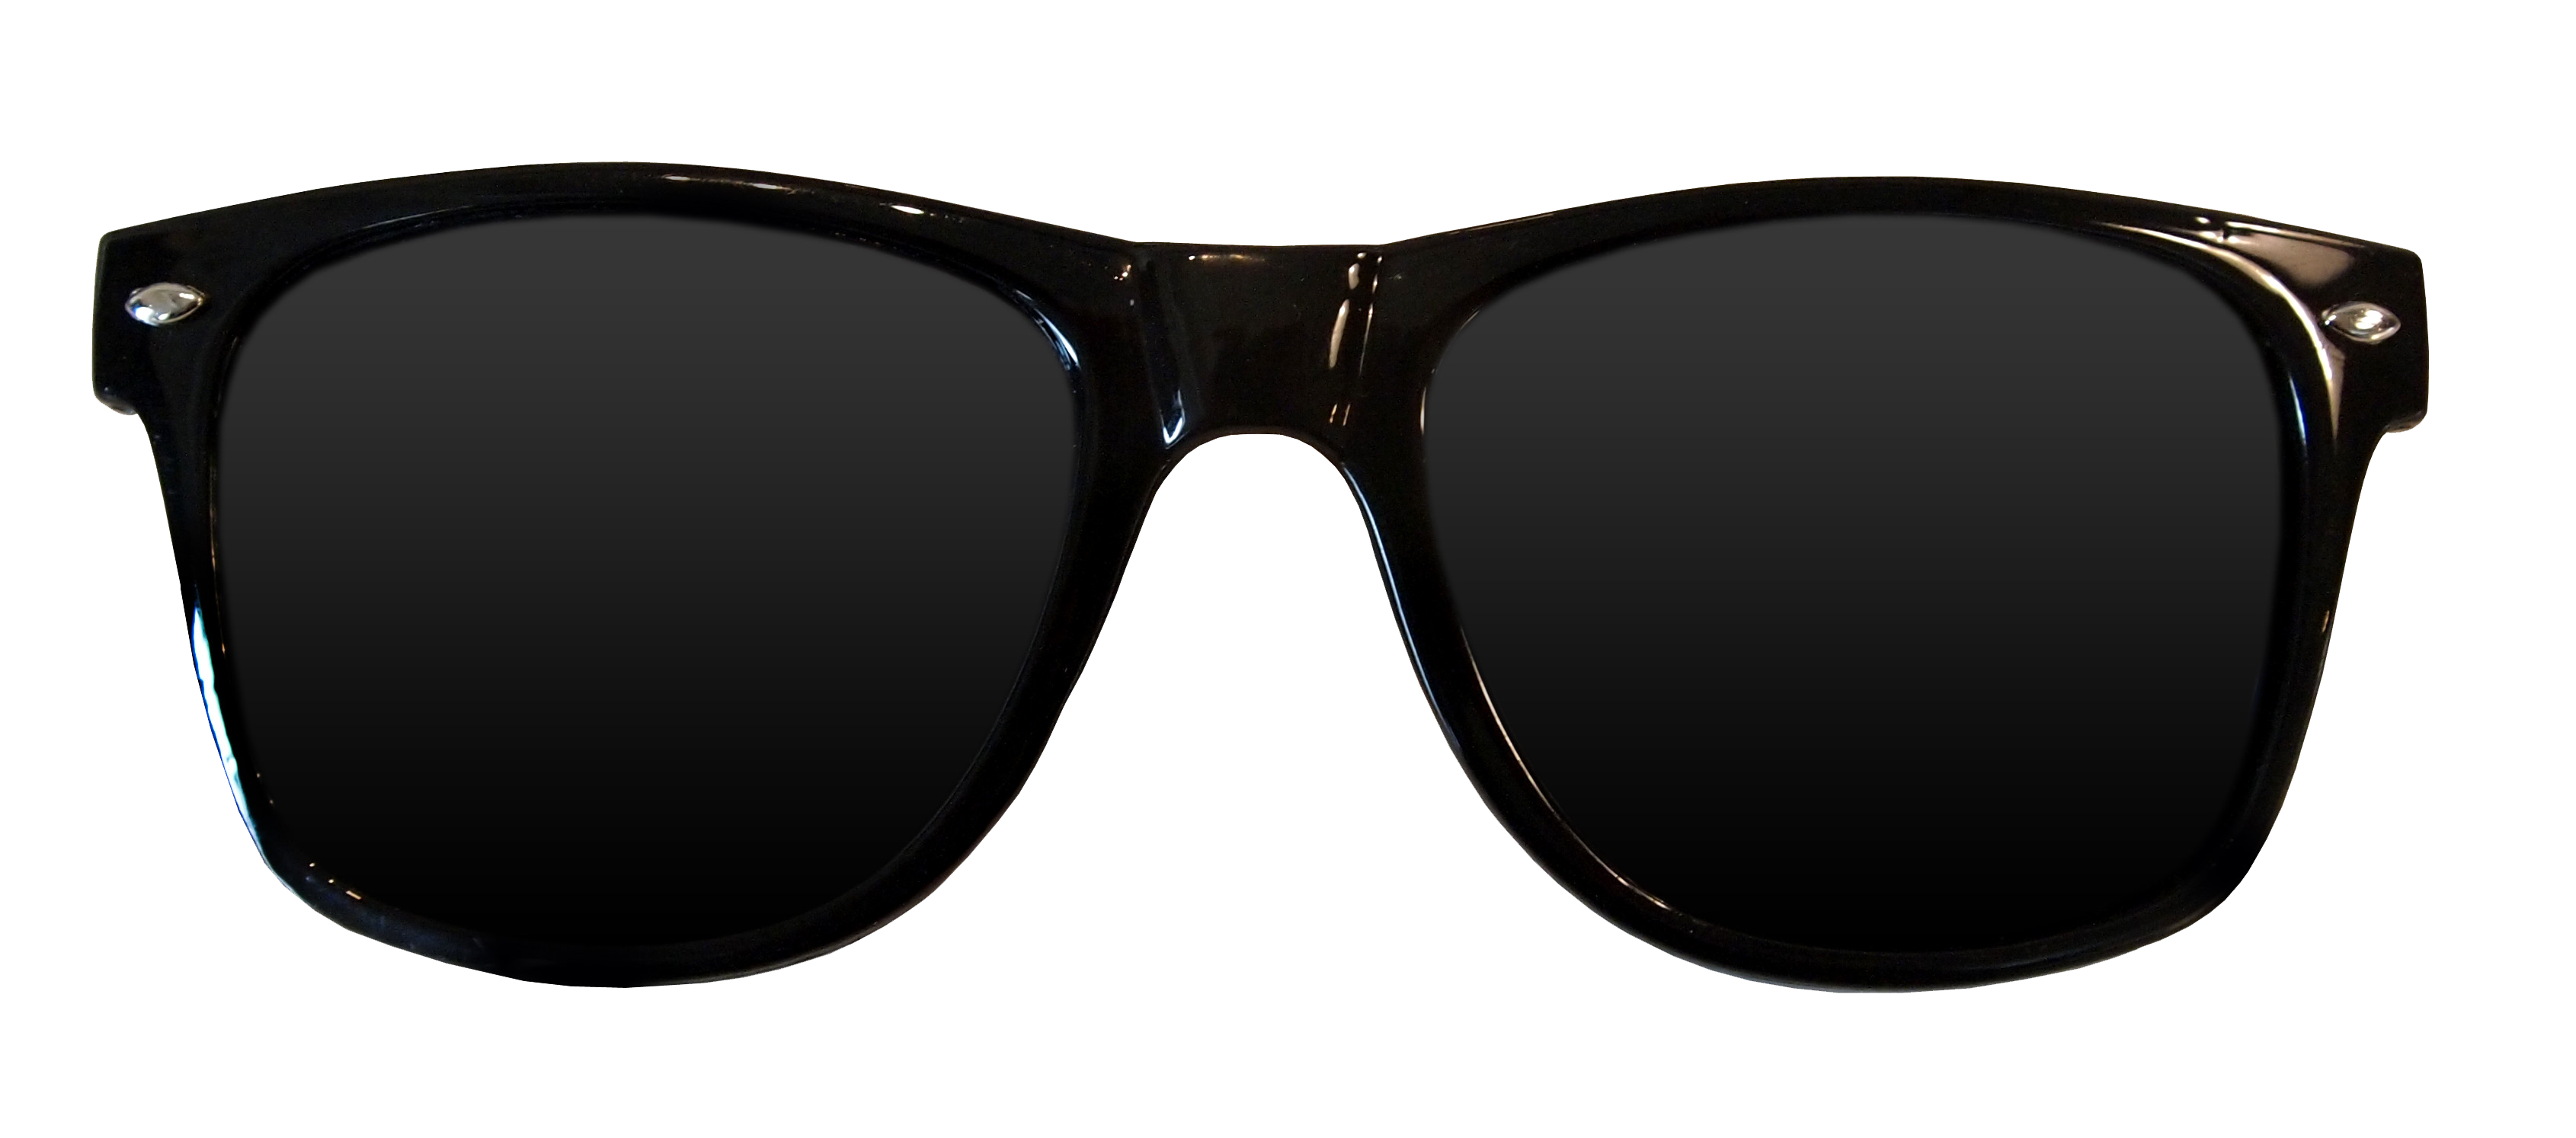 Sunglasses Free Download Png 